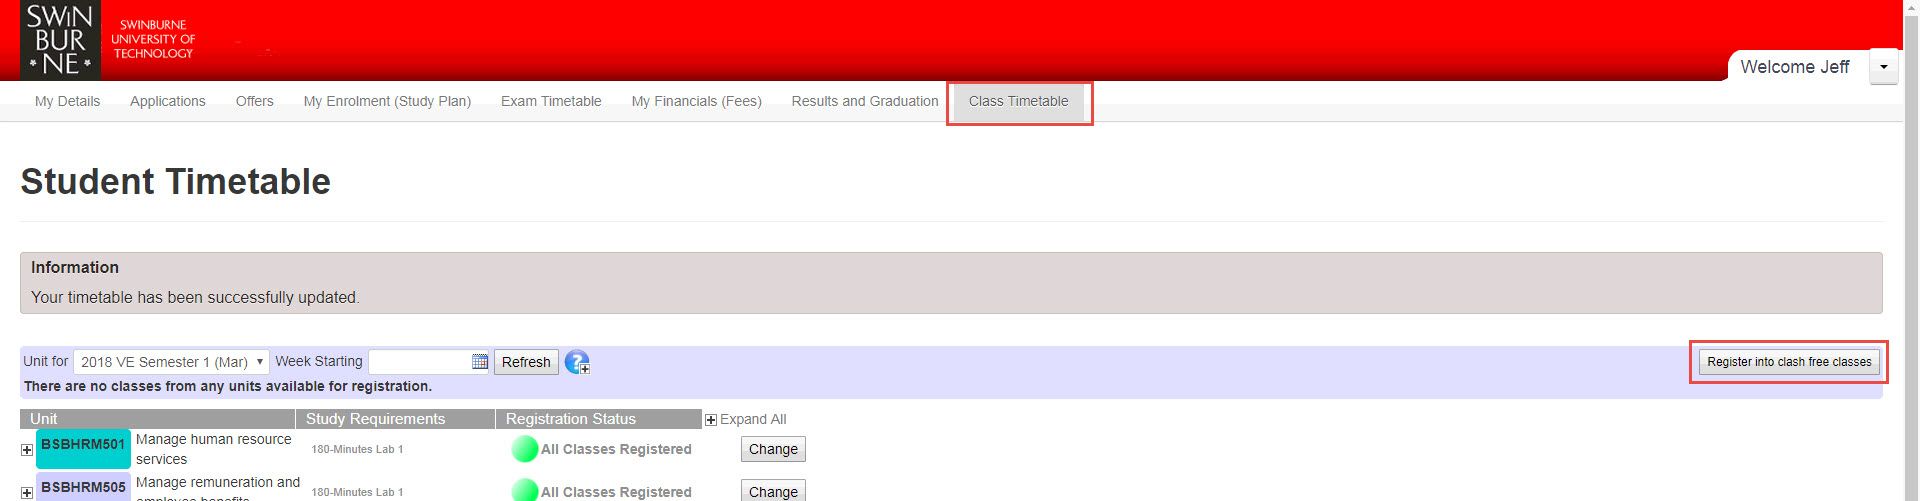 Screenshot of the ‘Class Timetable’ tab of the eStudent site that shows by clicking the grey ‘Register into clash free classes’ button on the right-hand side to automate a class timetable.